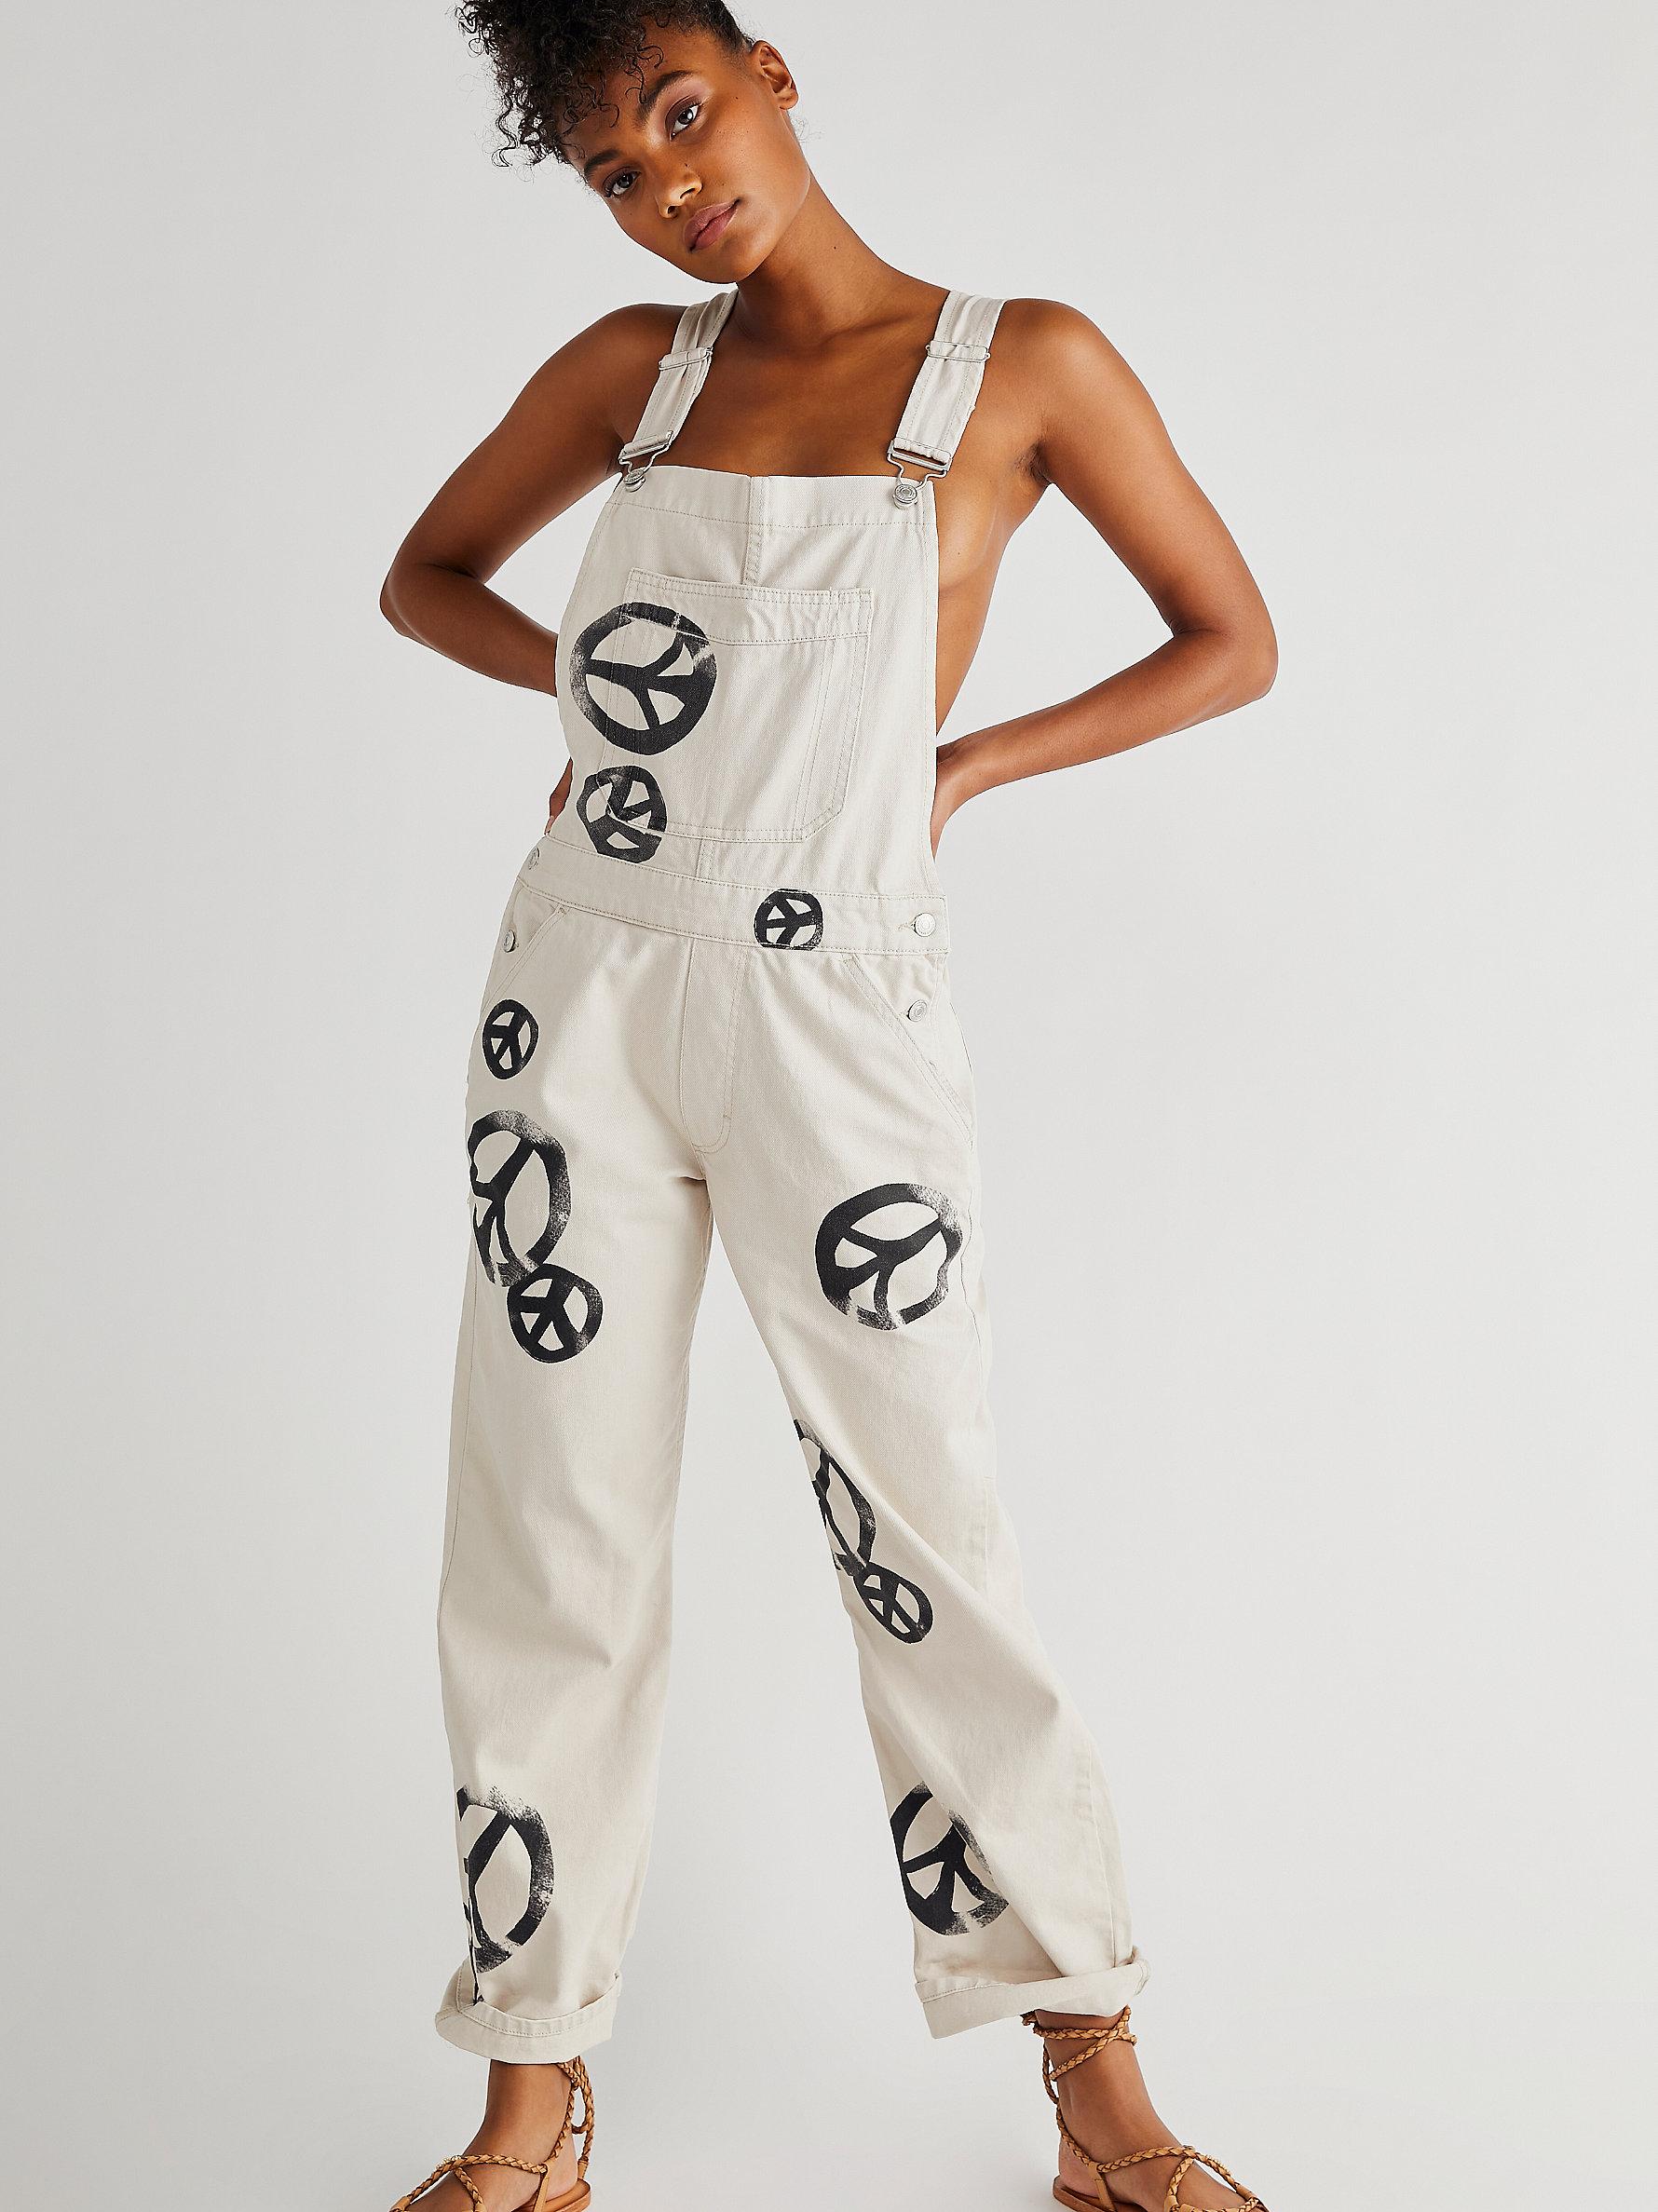 Free People Ziggy Harmony Overalls in White | Lyst Canada